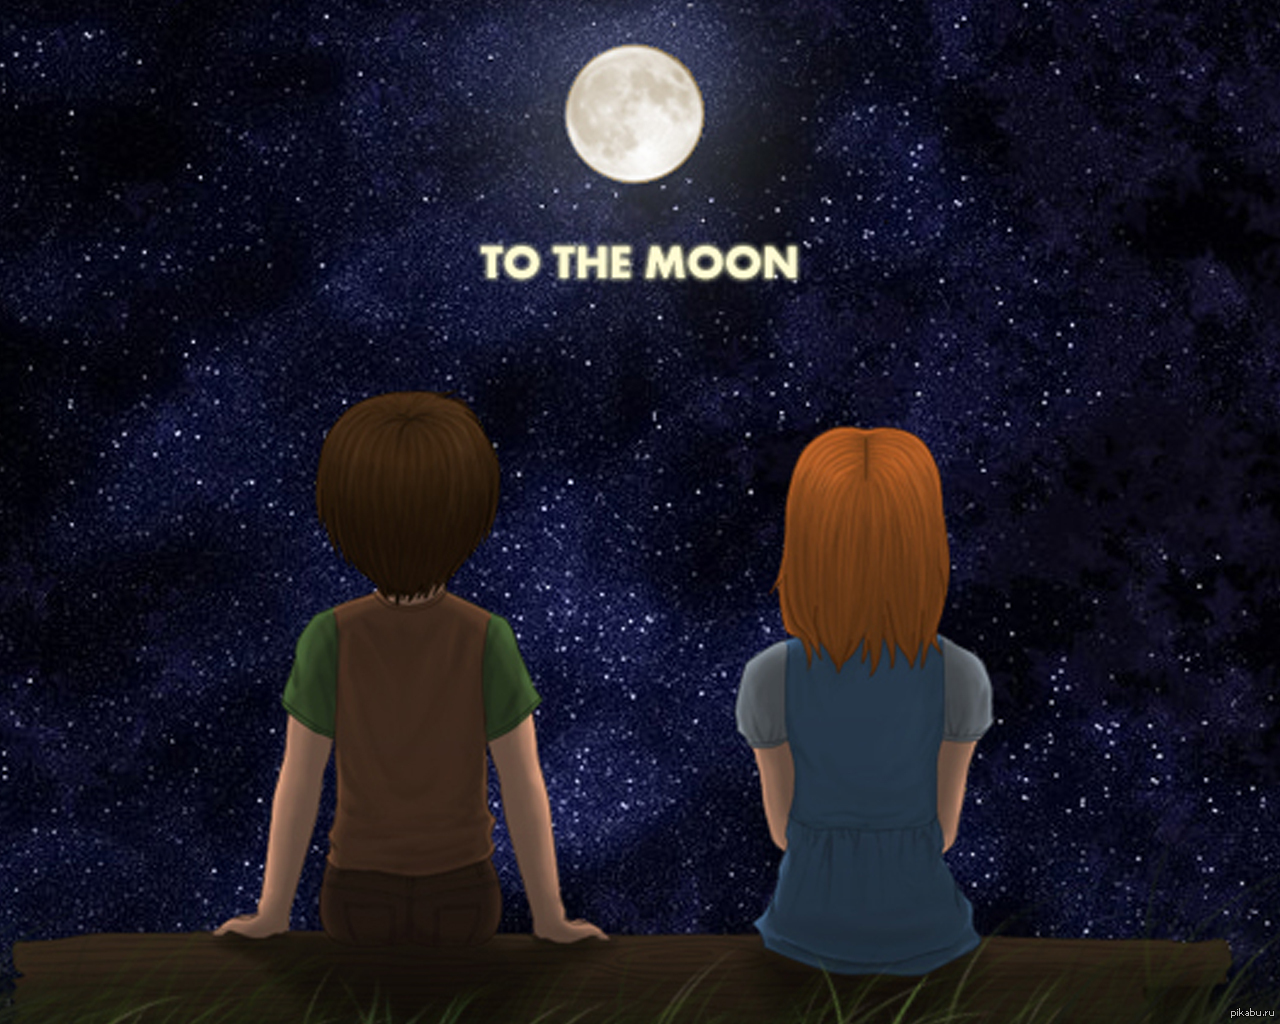 To the moon. To the Moon концовка. To the Moon надпись. Walk the Moon логотип. Walking to the Moon.